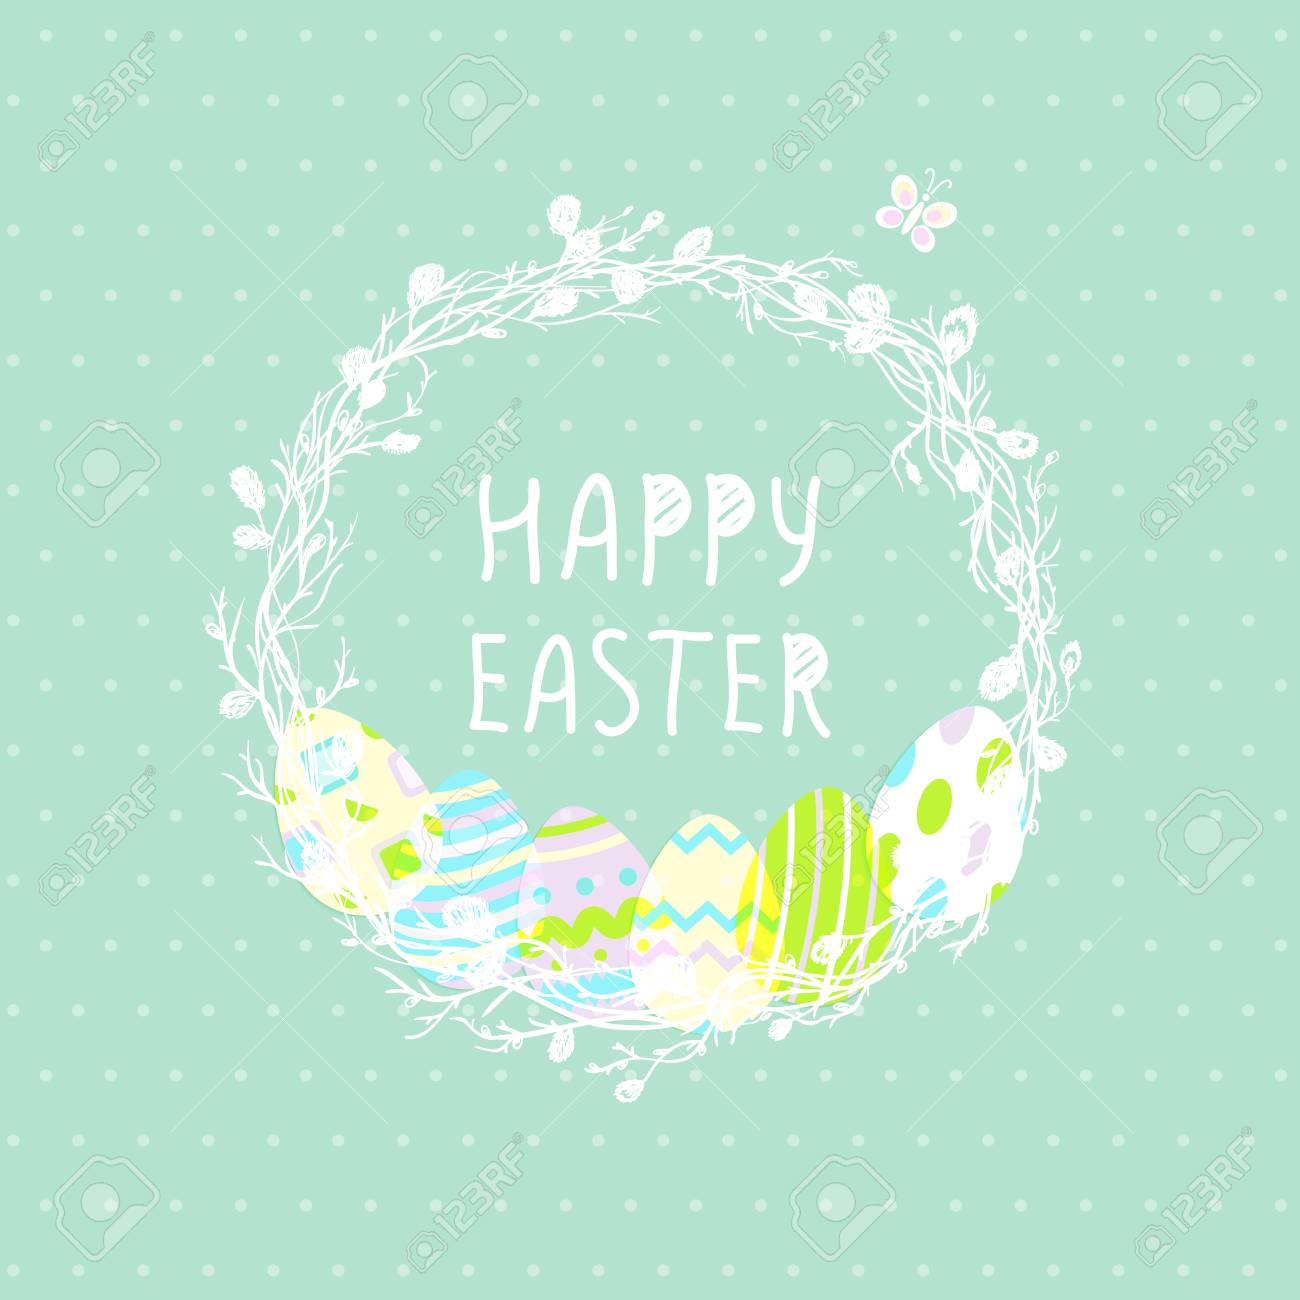 Free download Cute Easter Eggs In A Wicker Nest Greeting Card On A ...